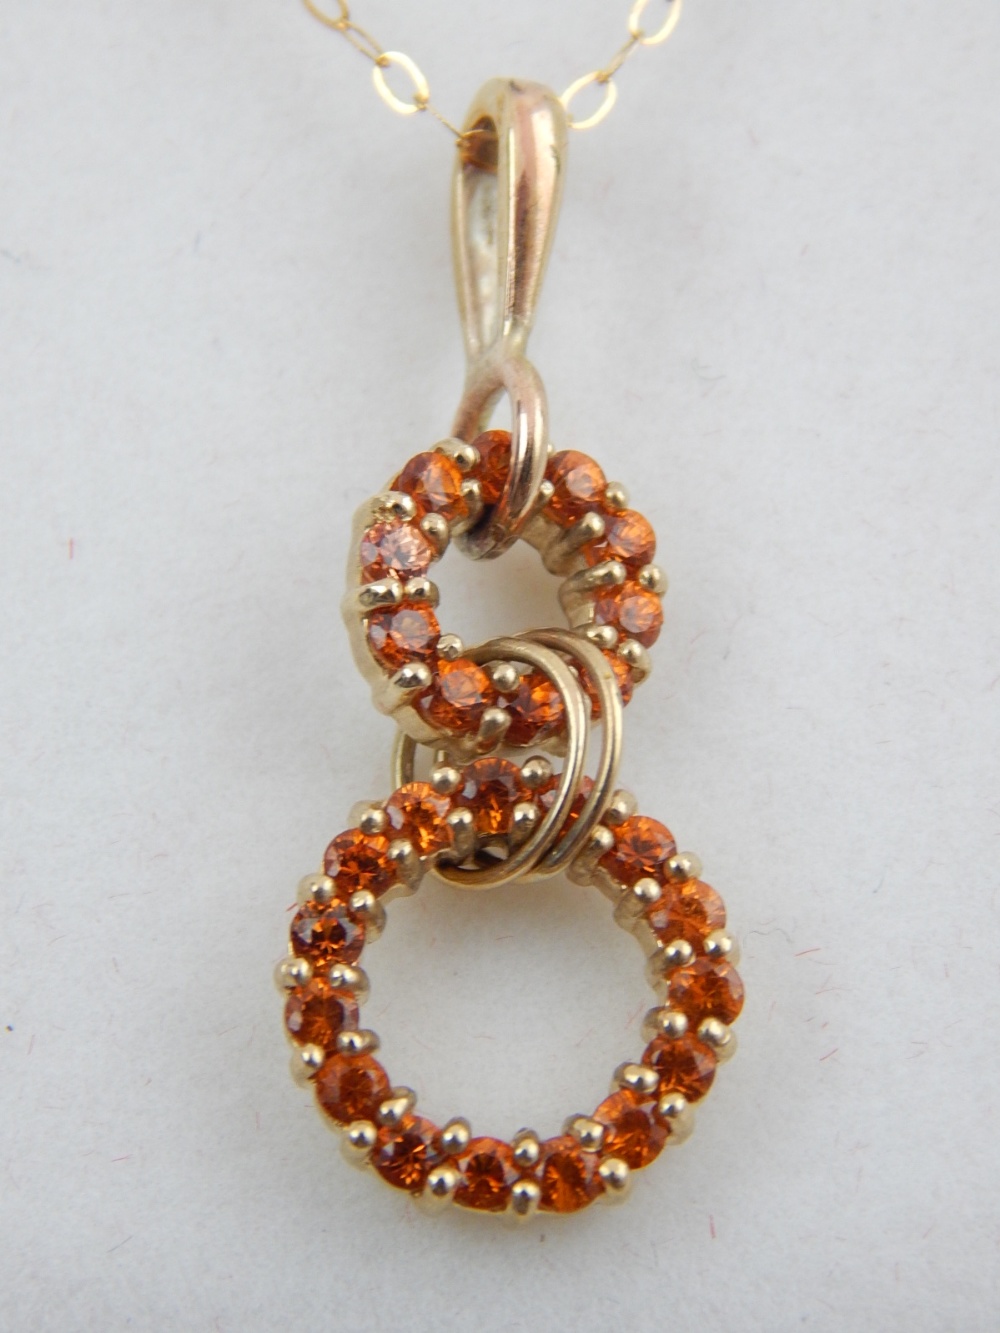 A 9ct yellow gold Maderia garnet drop pendant, suspended on a 9ct yellow gold chain.